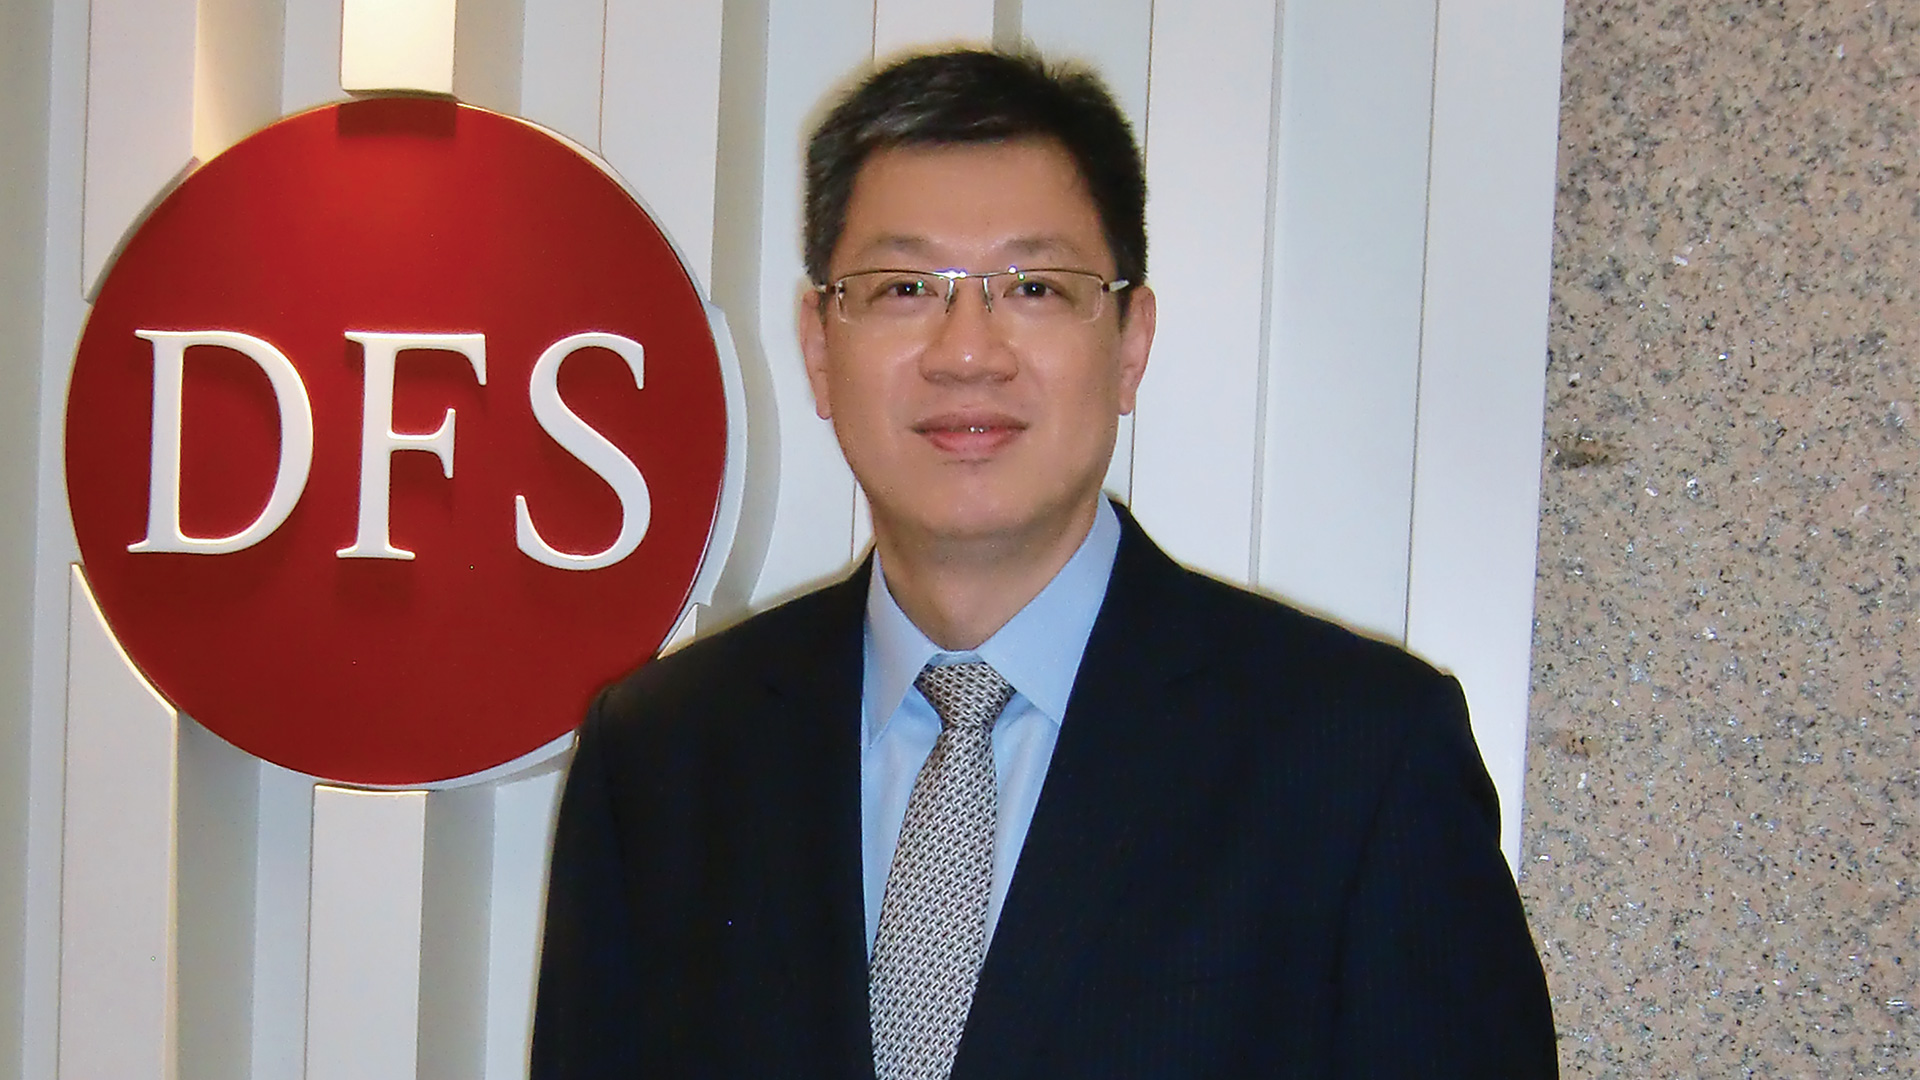 Kenneth Ng, Director and Corporate Treasurer at DFS Group